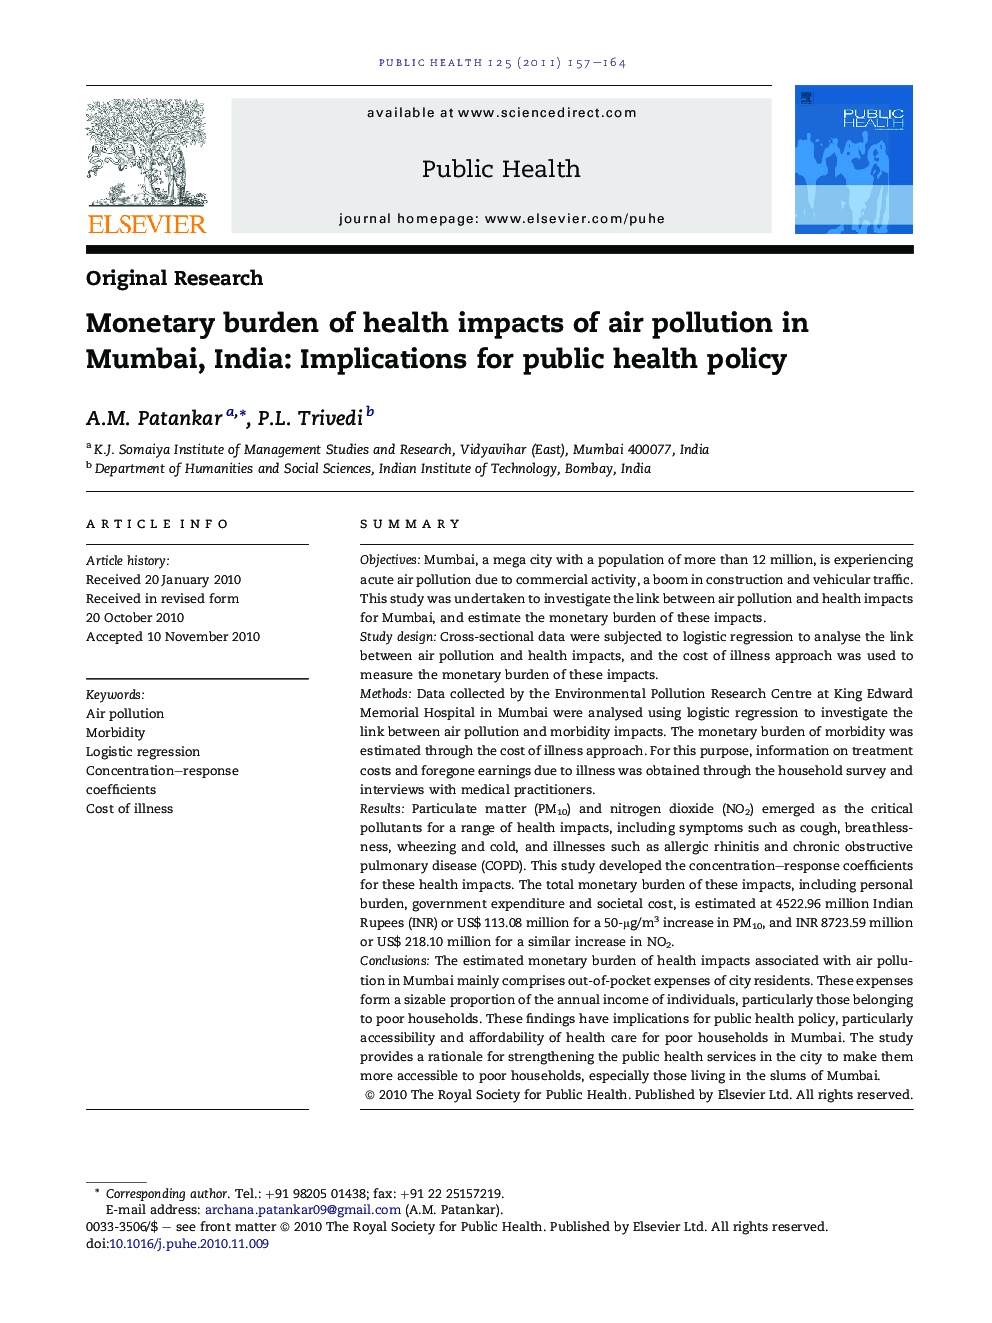 Monetary burden of health impacts of air pollution in Mumbai, India: Implications for public health policy